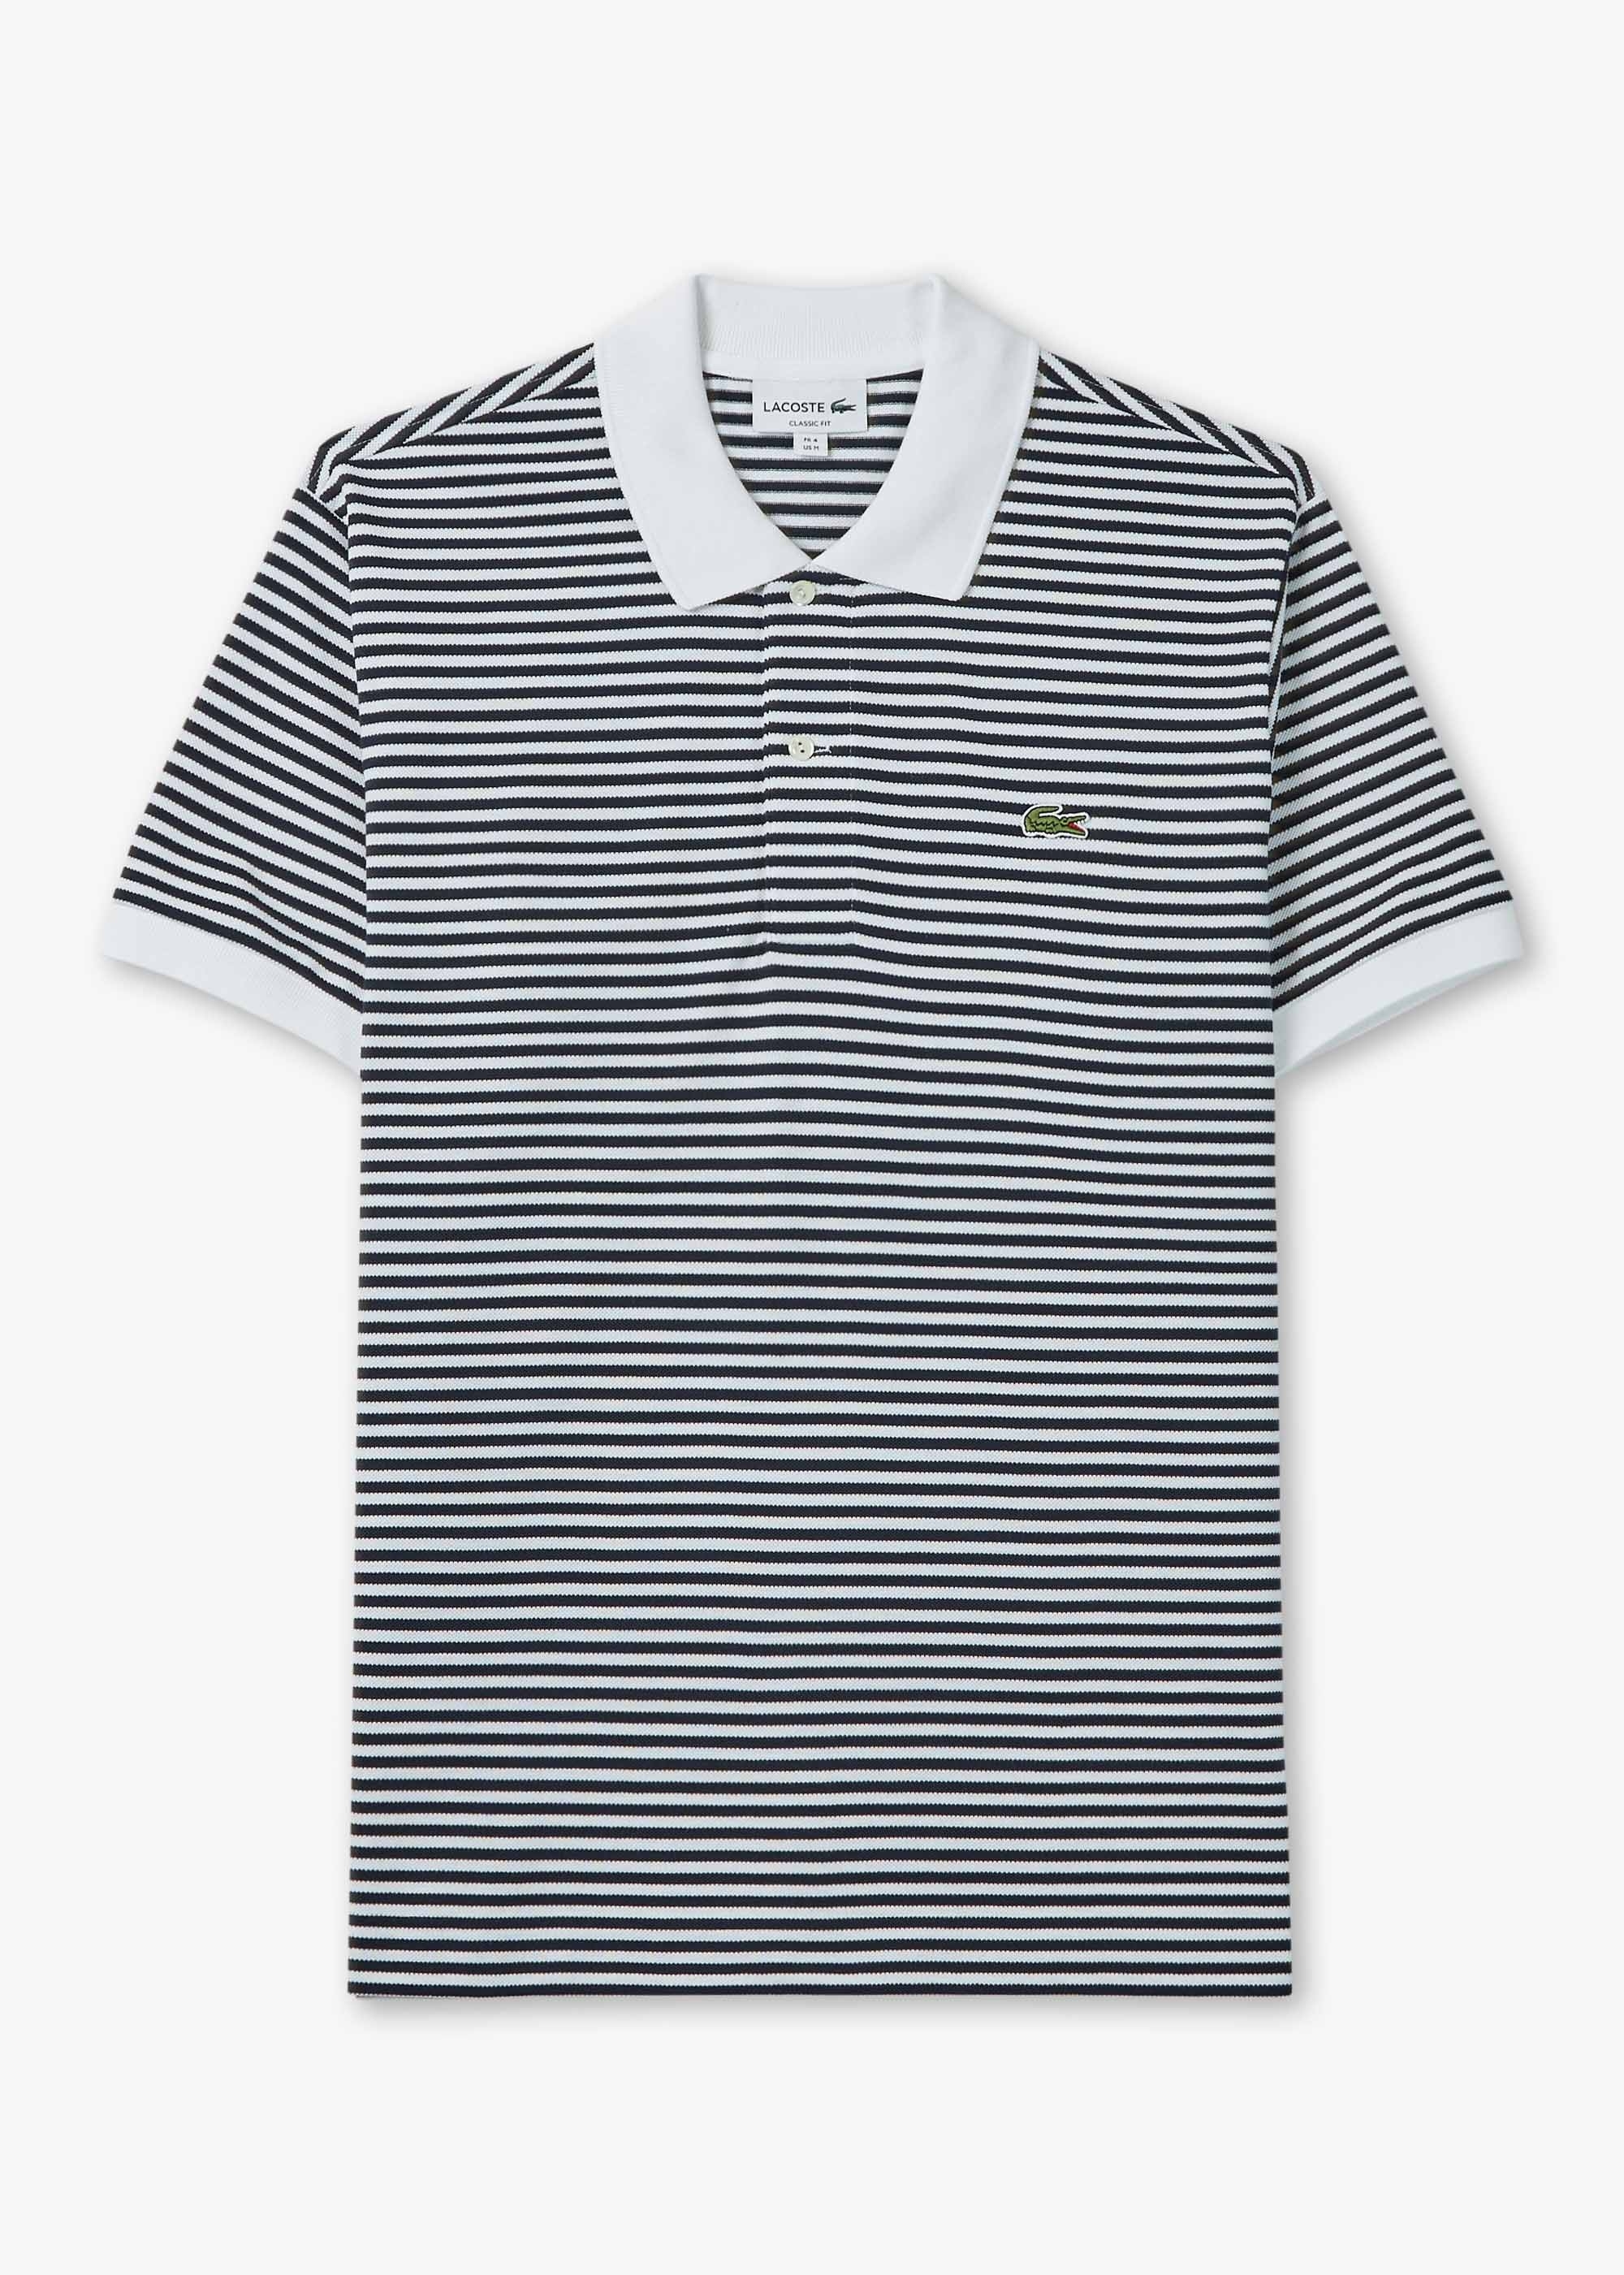 Lacoste Mens Striped Cotton Polo Shirt In Blue/White